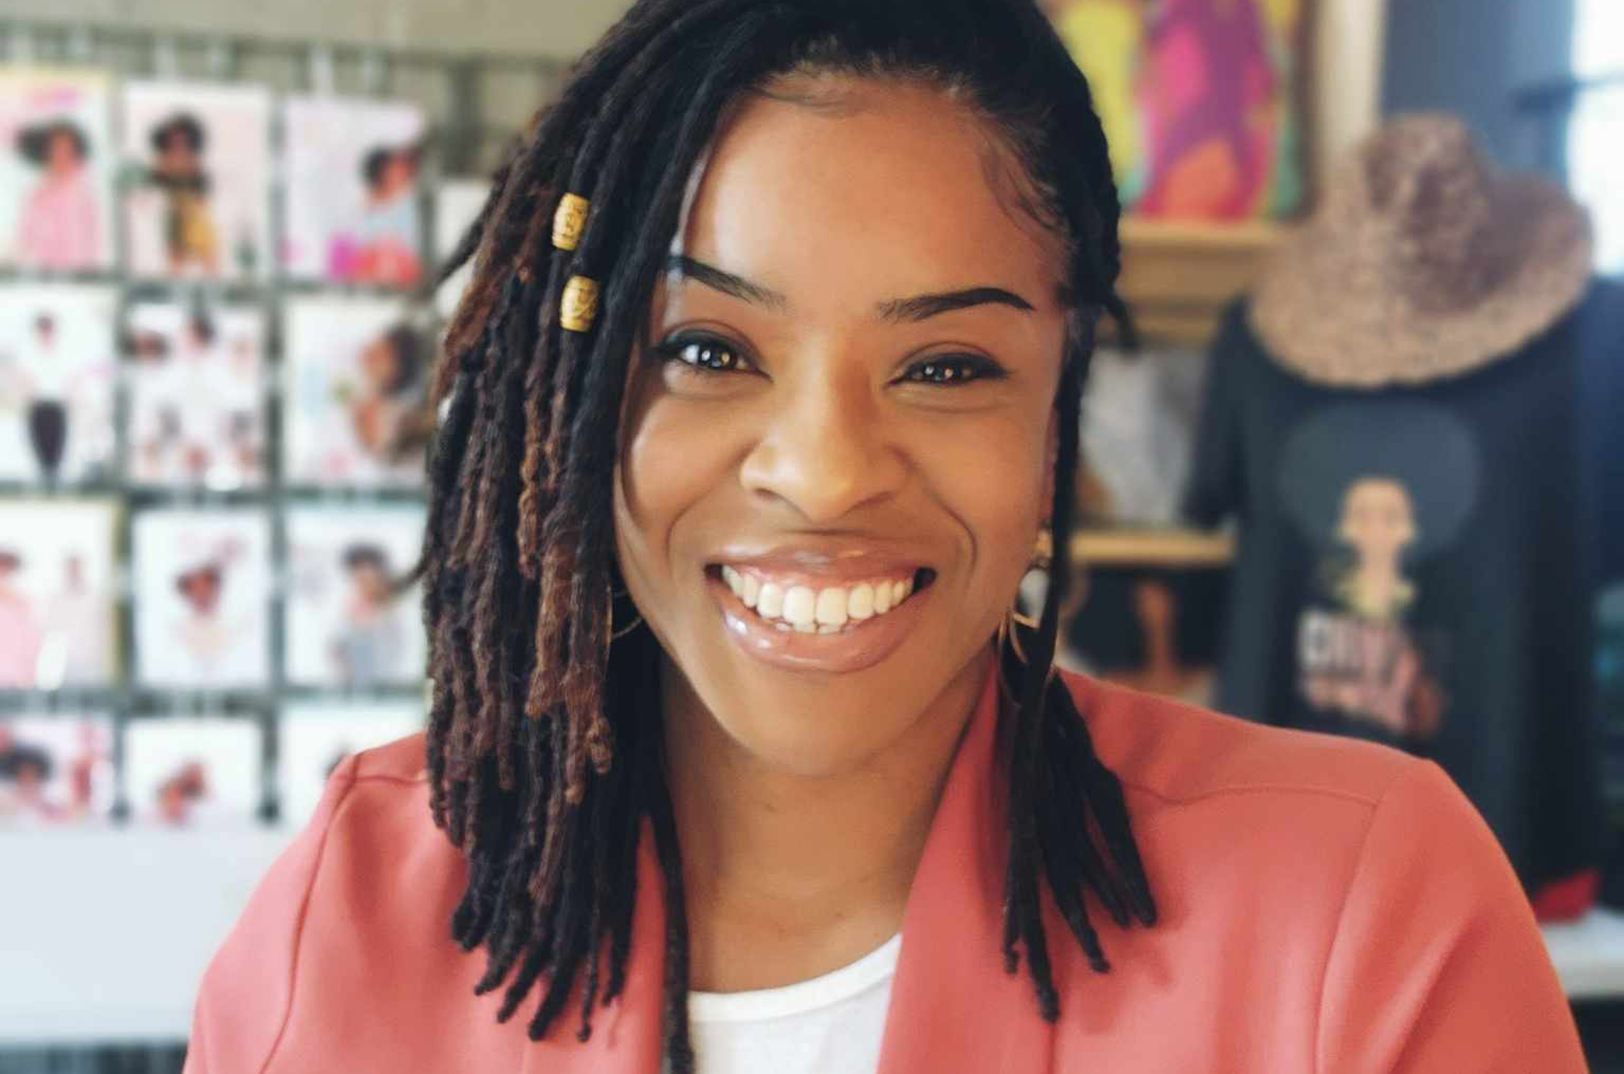 CRWND as a KC pitch contest winner, Keliah Smith expands her product line (and comfort zone)